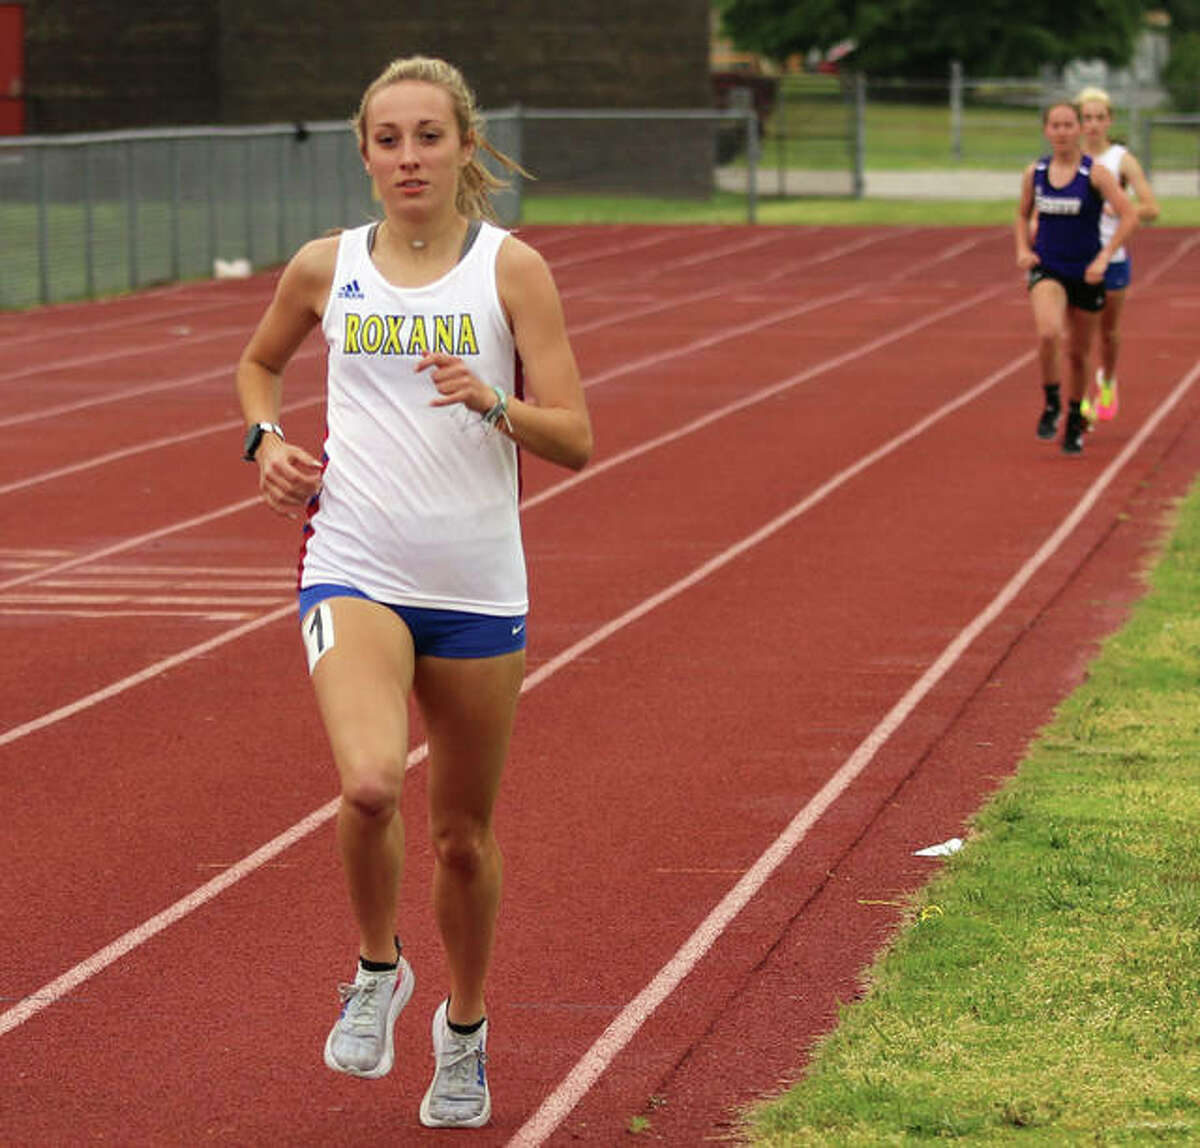 Roxana’s Janelynn Wirth (left), shown winning the 1,600 meters at the Madison County Meet on May 17 in Wood River, won the 1,600 and was second in the 3,200 on Thursday at the SCC Meet in Pana.